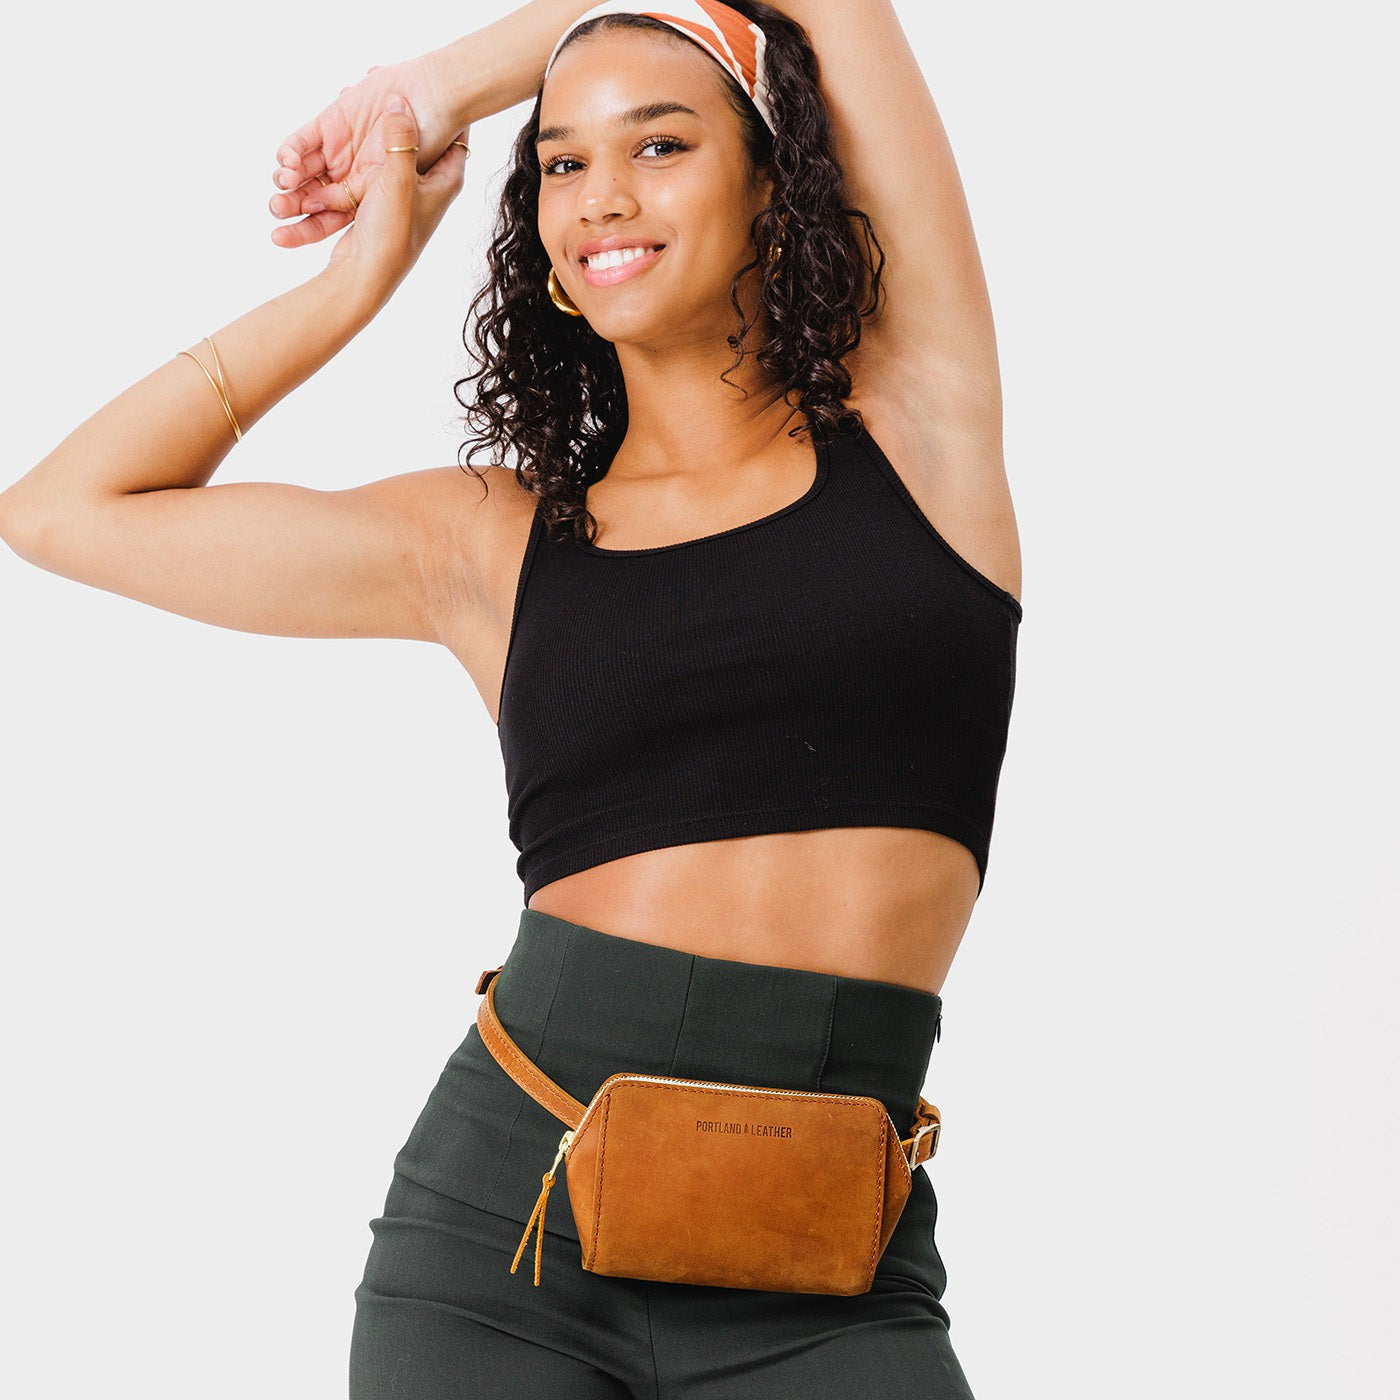 Portland Leather 'Almost Perfect' Basic Belt Bag, Grizzly